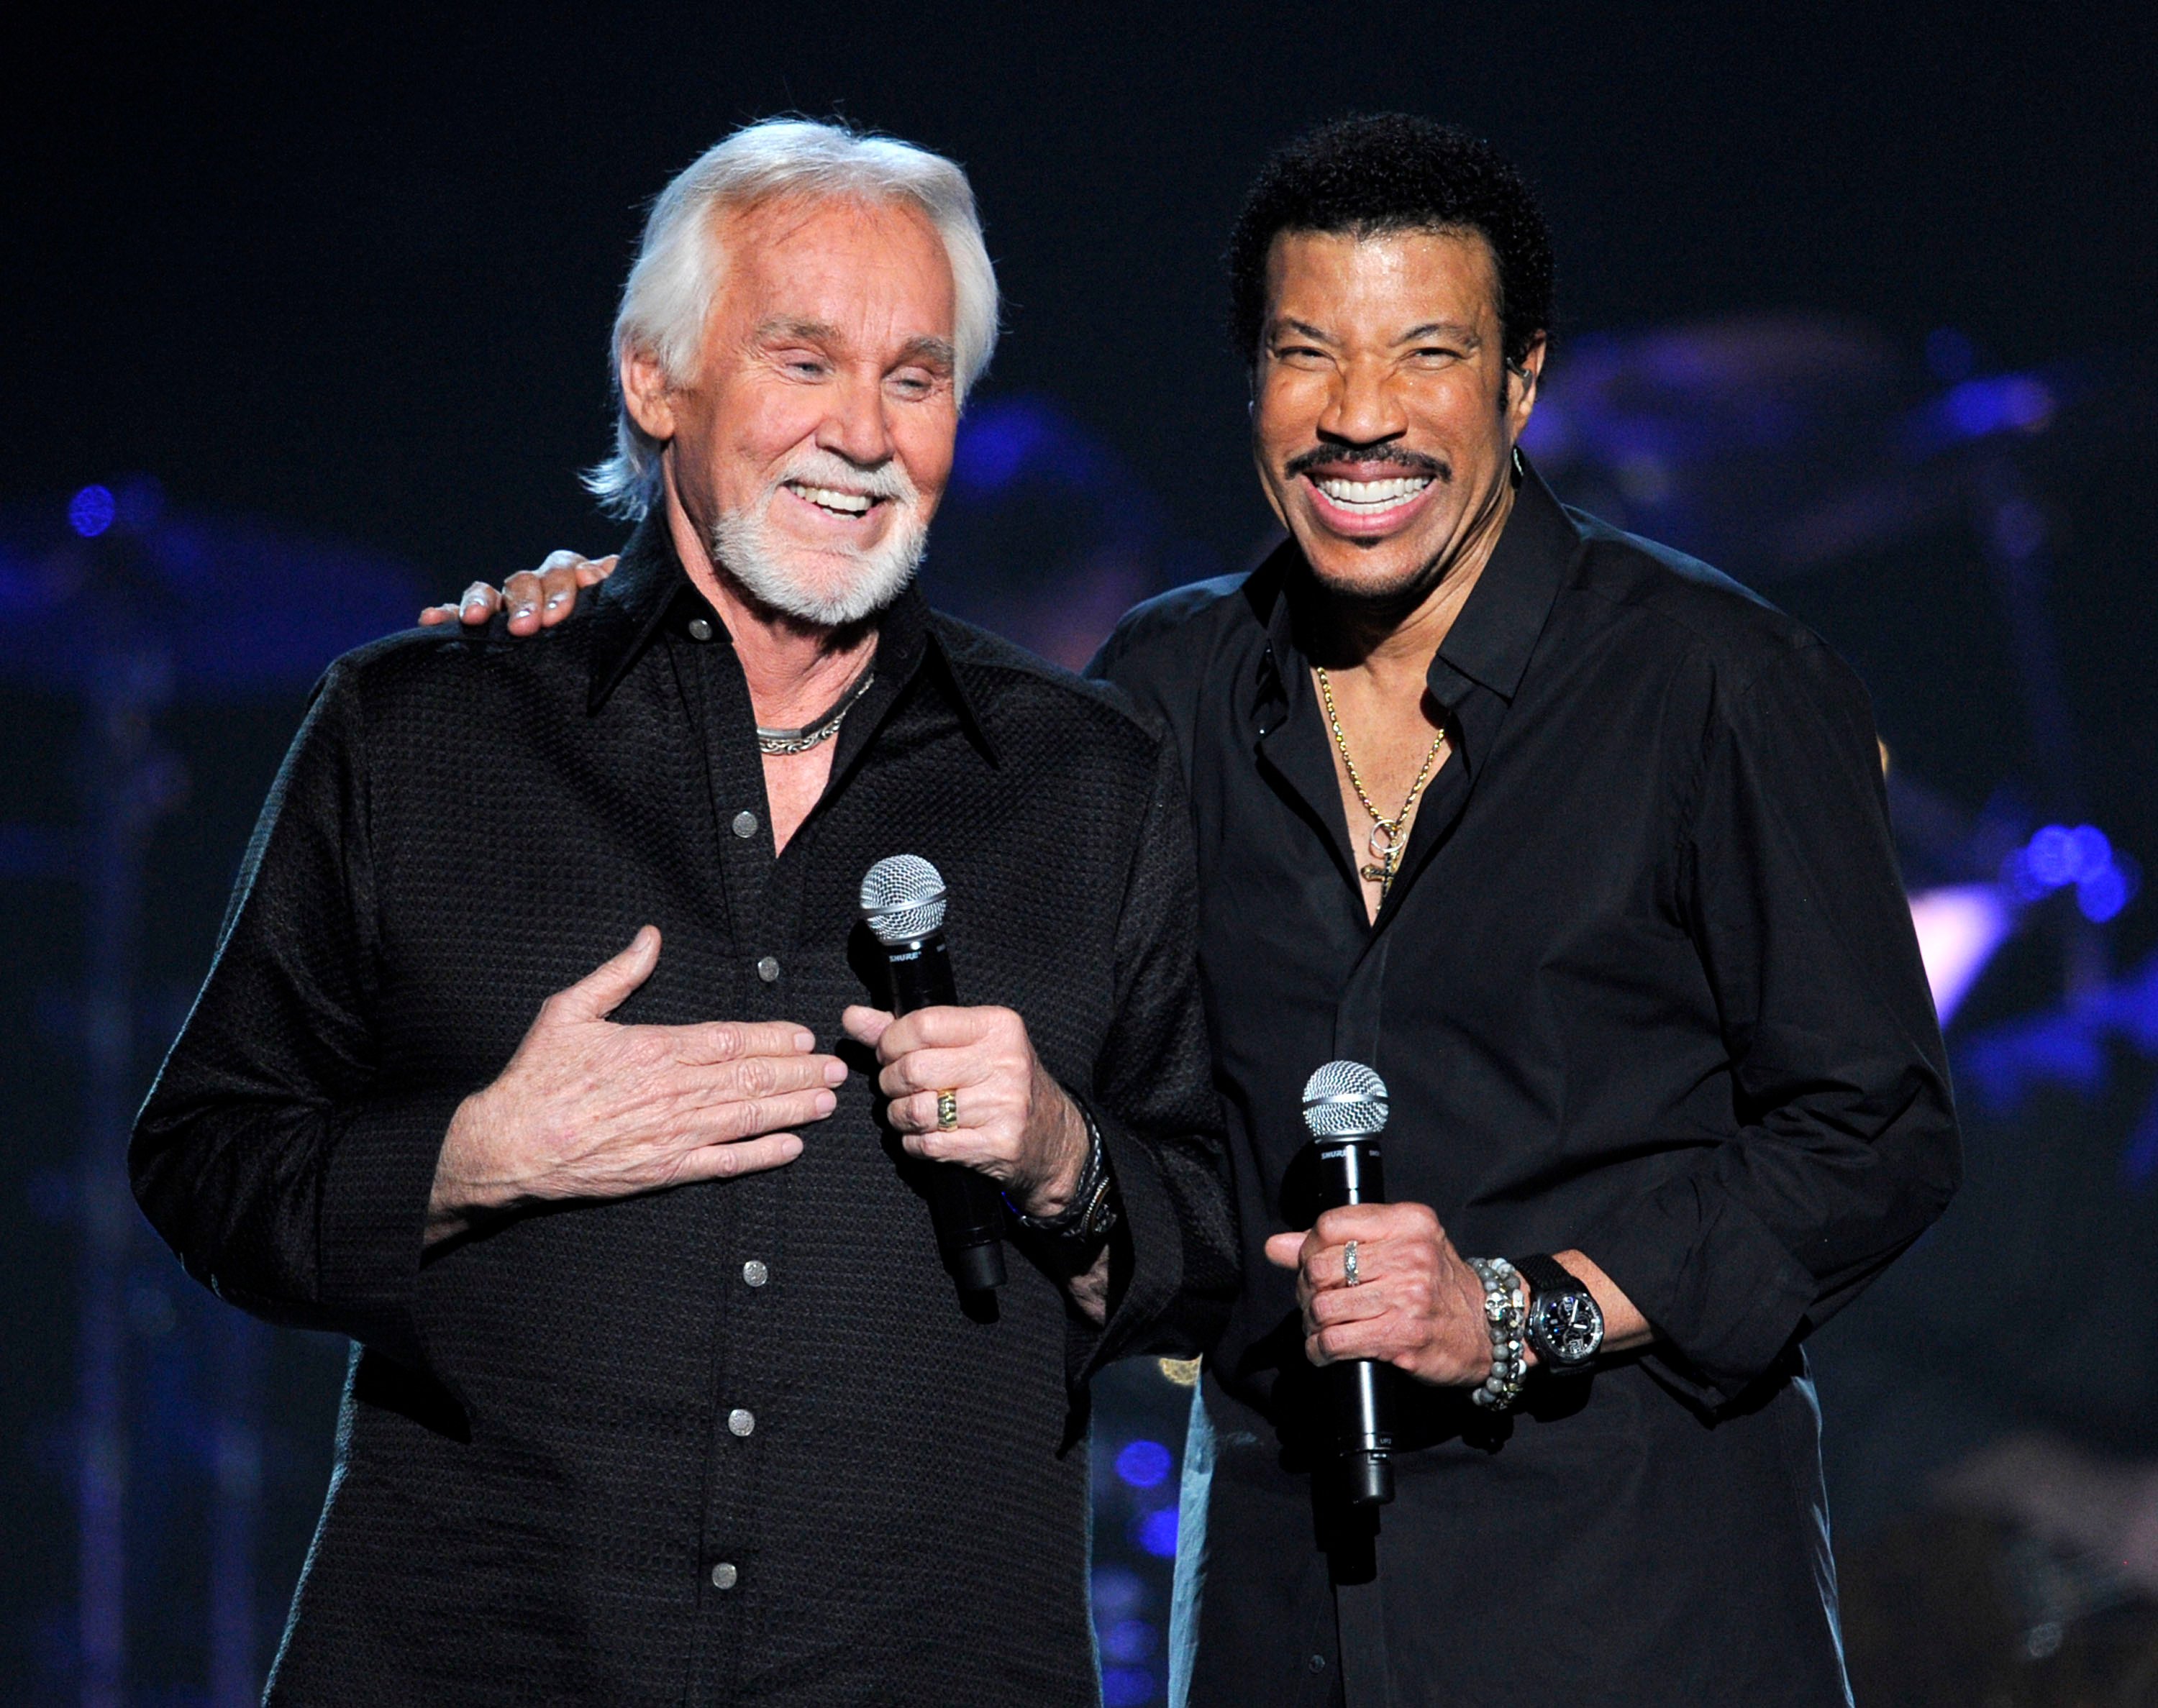 Kenny Rogers and Lionel Richie perform onstage during Lionel Richie and Friends in Concert presented in 2012 | Ethan Miller/Getty Images